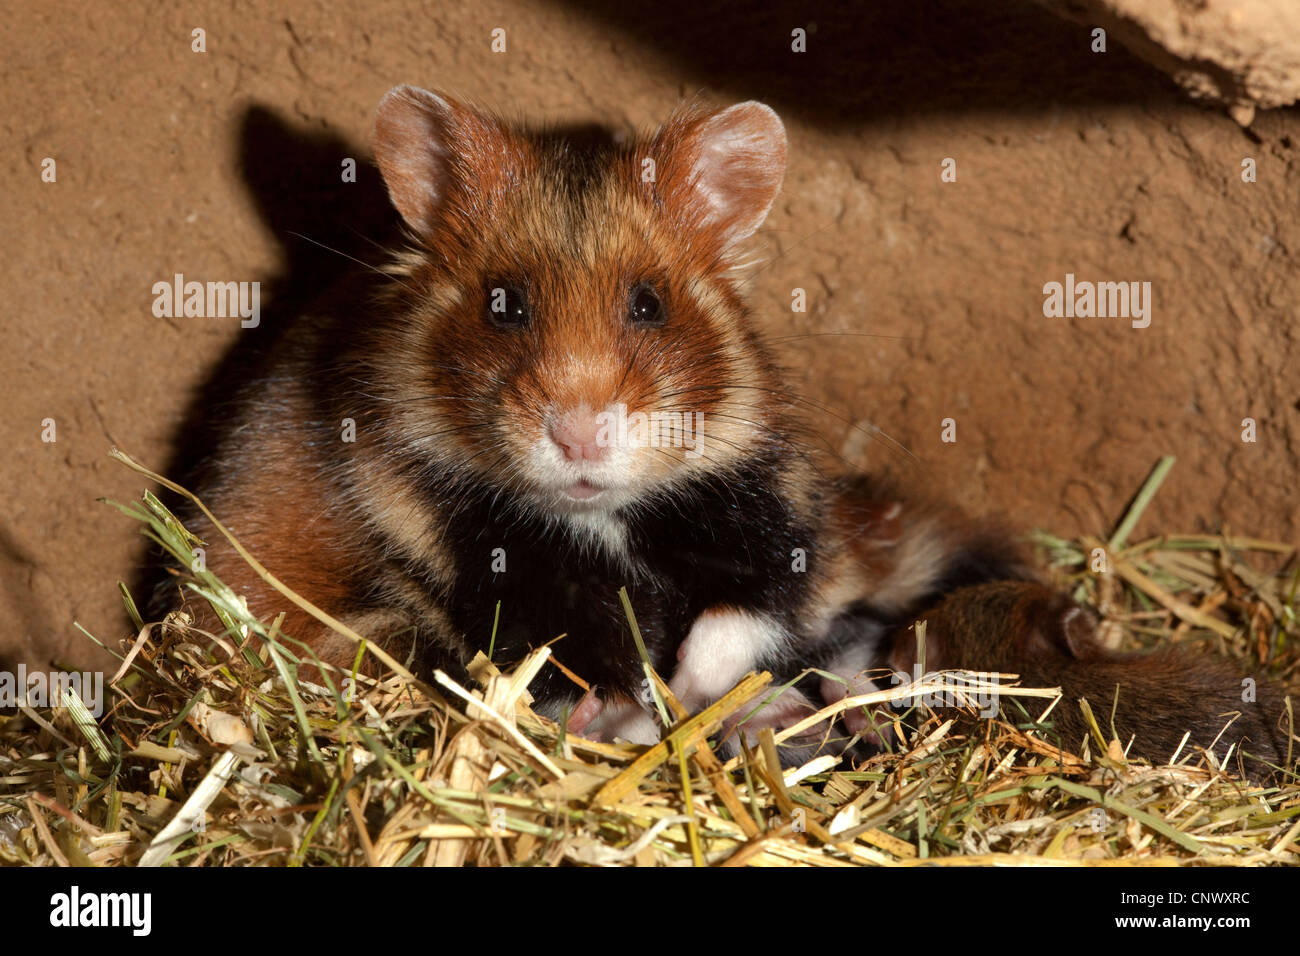 common hamster, black-bellied hamster (Cricetus cricetus), female with young animal in a subterraneous den Stock Photo